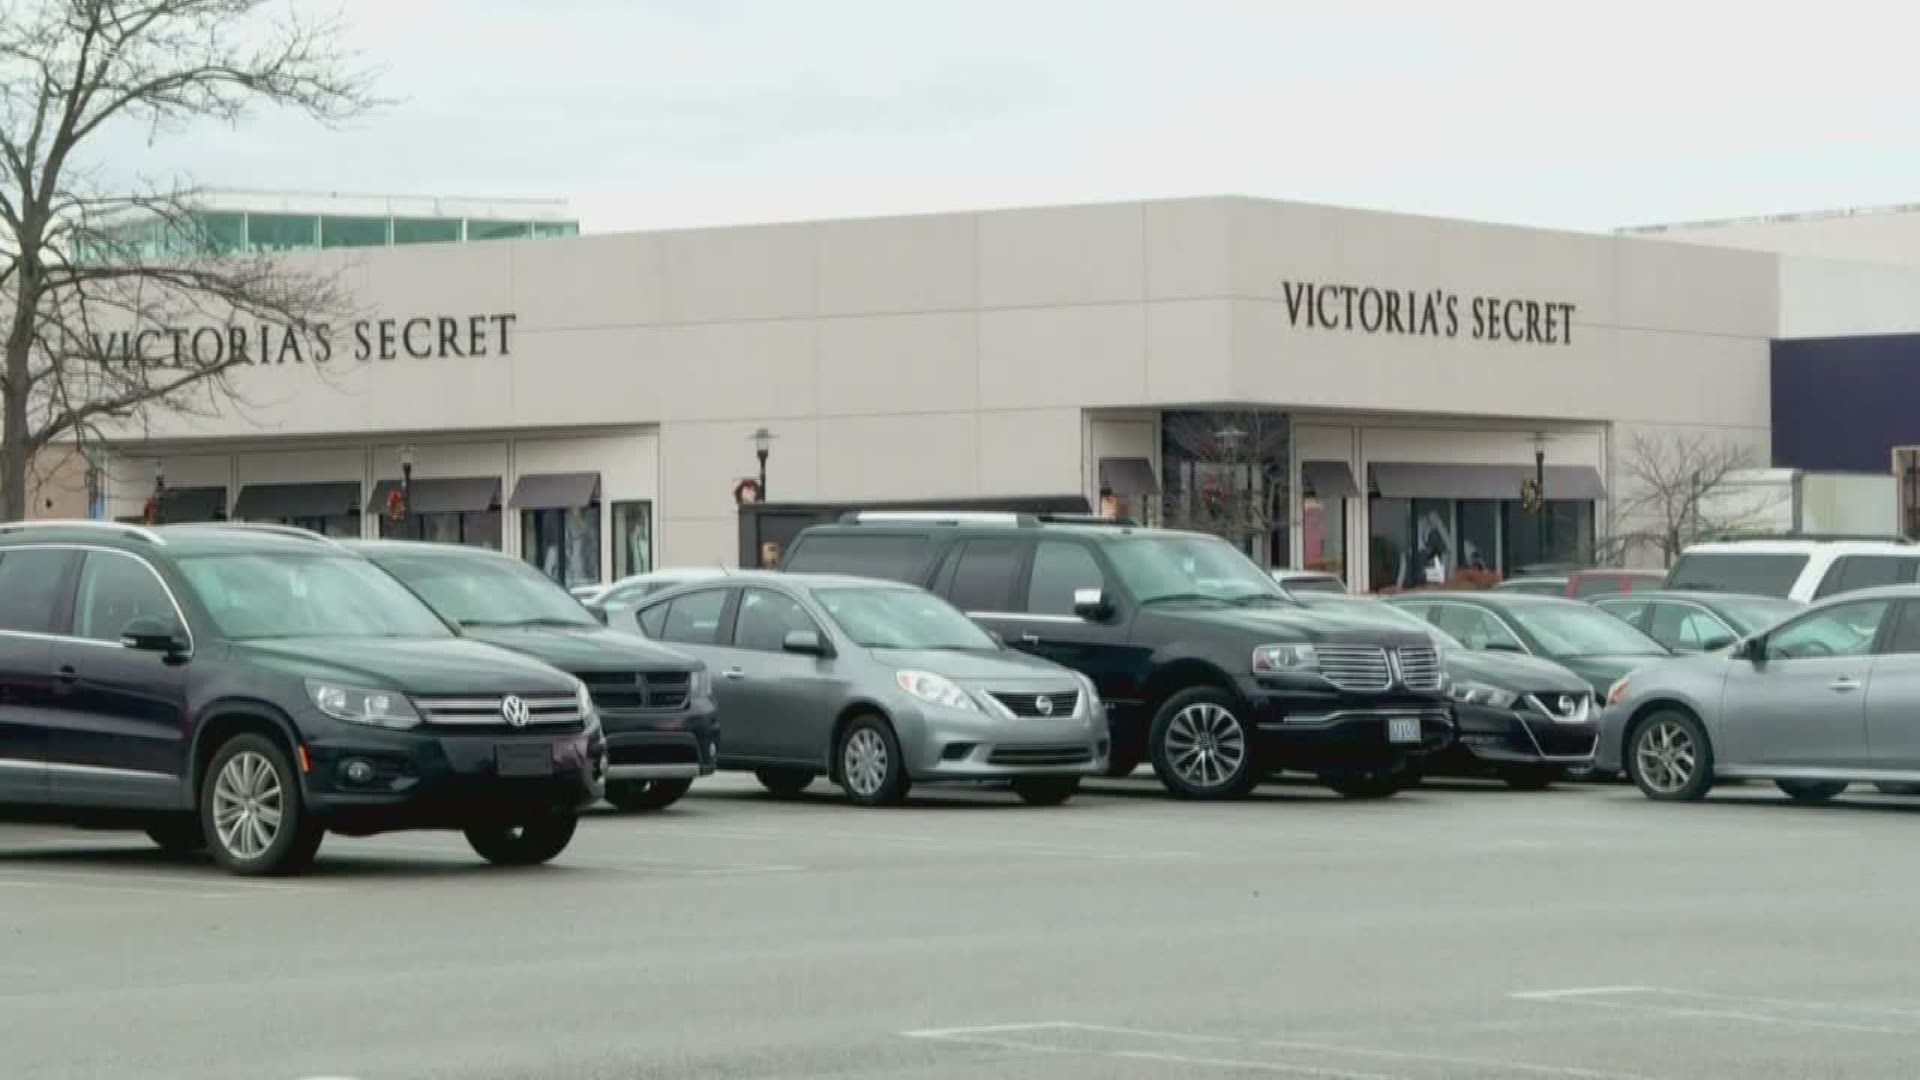 They're calling it a "retail blitz" and it's  organized effort between St. Matthews P.D. 8th division LMPD and the Kentucky retail crime association.